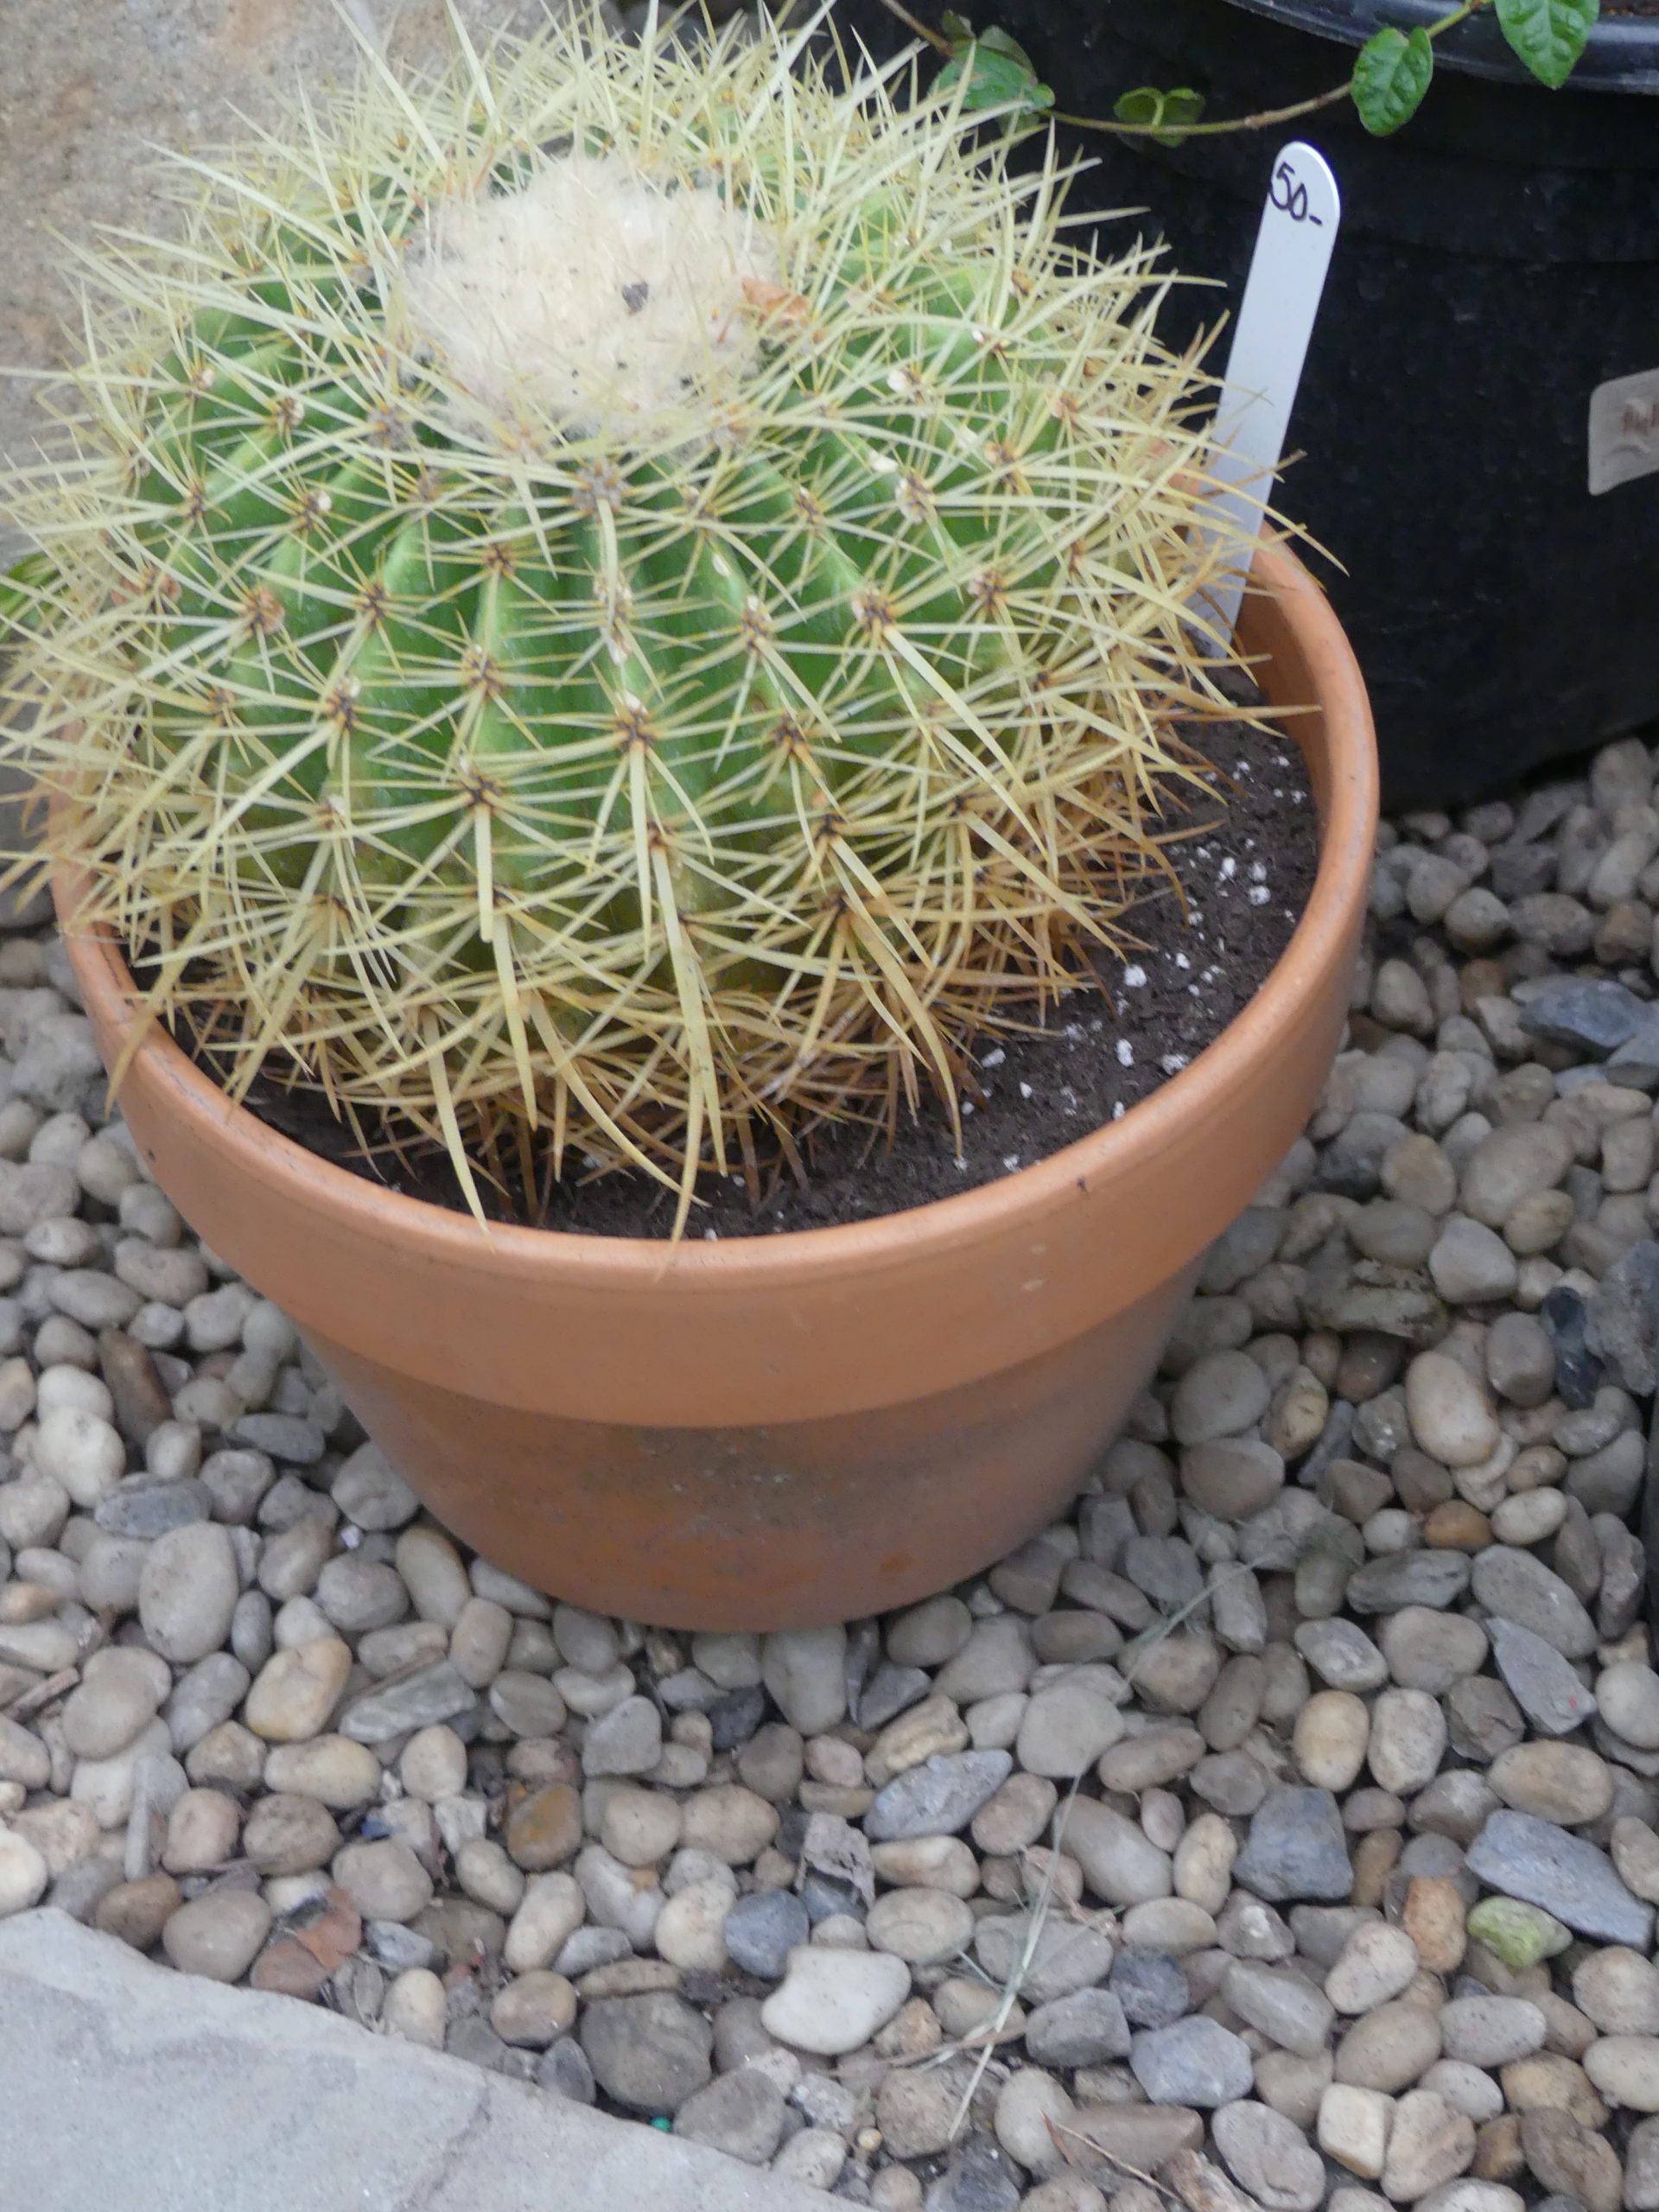 The price of this cacti ($50) is pretty clear, but it has no care or name tag. It’s probably in the Mammillaria group that includes 170 species. At least it’s in a clay pot, but it’s too big. Cacti like being in “tight” pots.